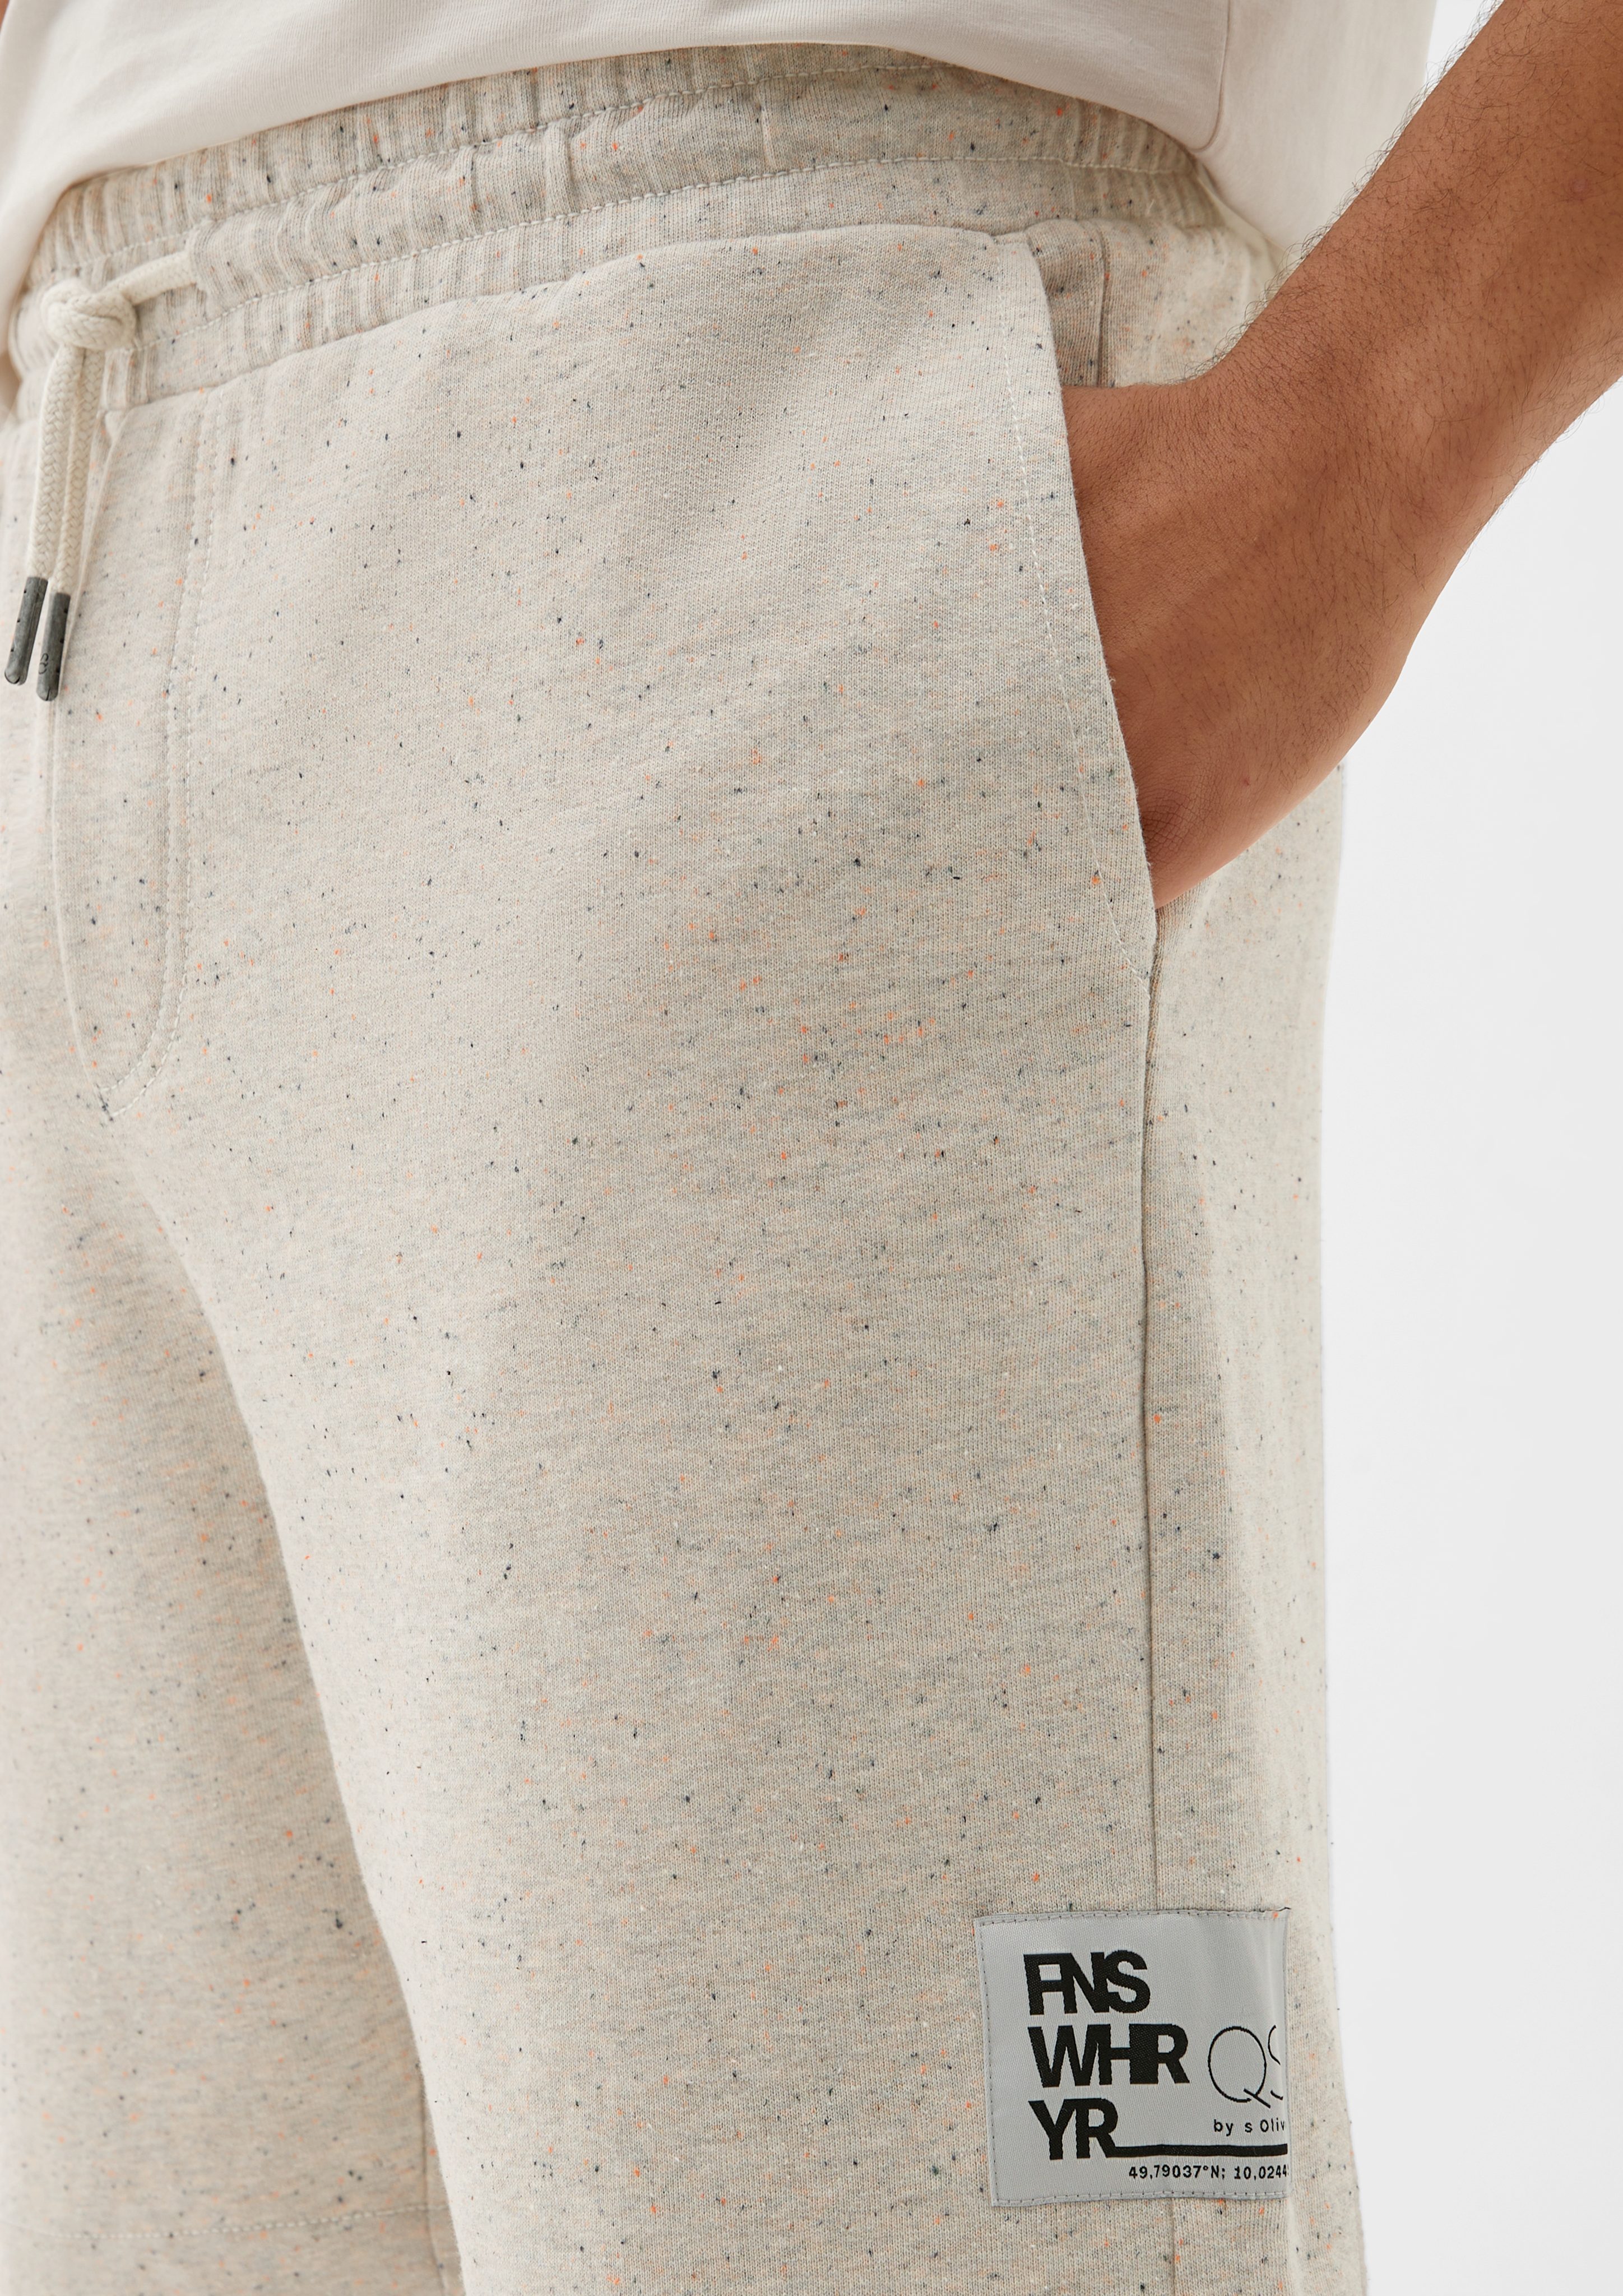 s.Oliver QS Hose helles Shorts & Relaxed: beige Melierte Label-Patch Shorts